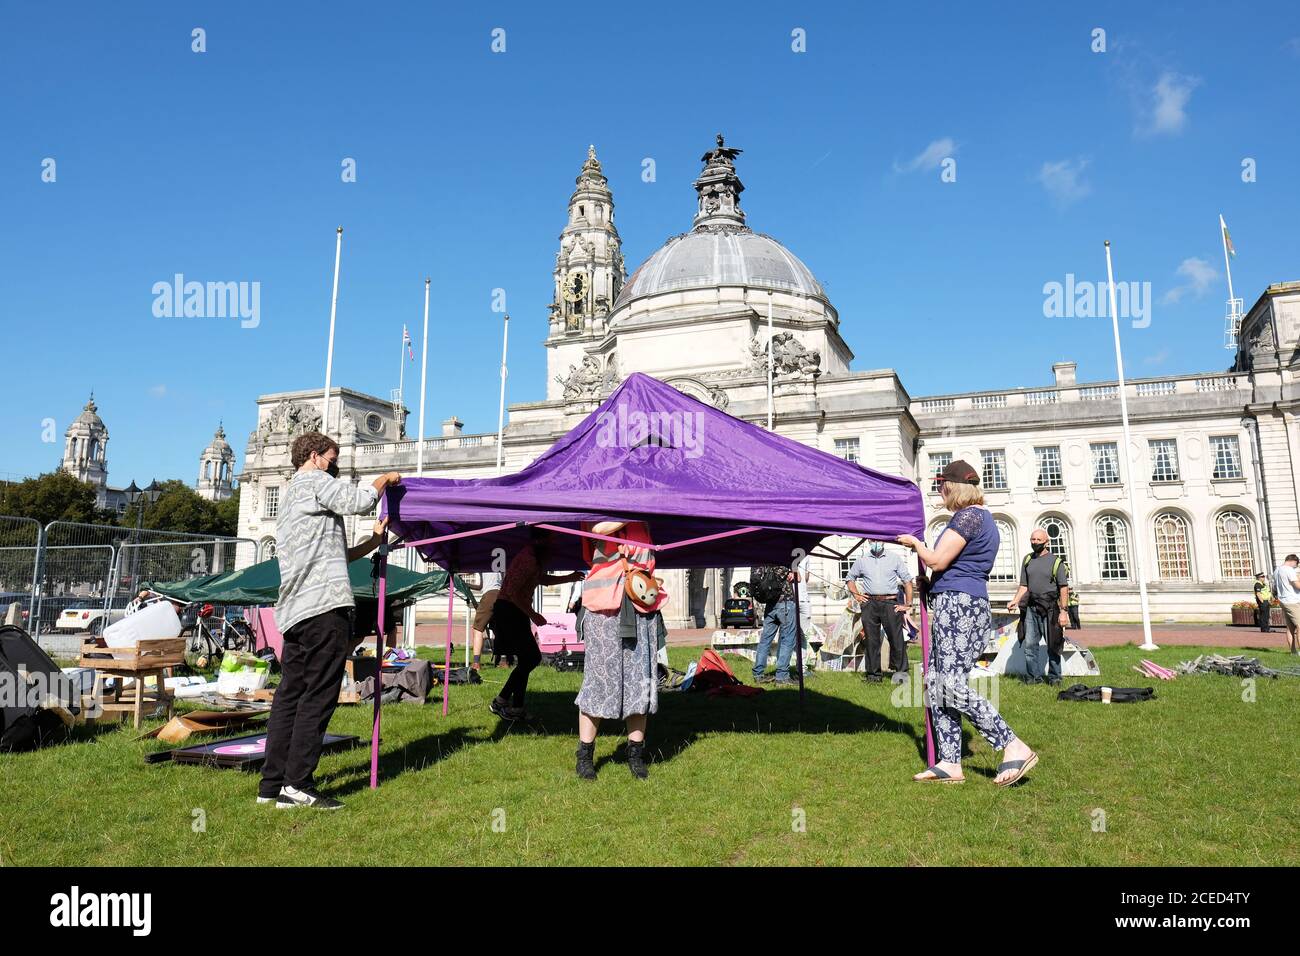 Cardiff, Wales, UK - Tuesday 1st September 2020 - Extinction Rebellion ( XR ) protesters begin setting up camp outside Cardiff City Hall in preparation for a week of action protesting against climate change and the future of society. Photo Steven May / Alamy Live News Stock Photo